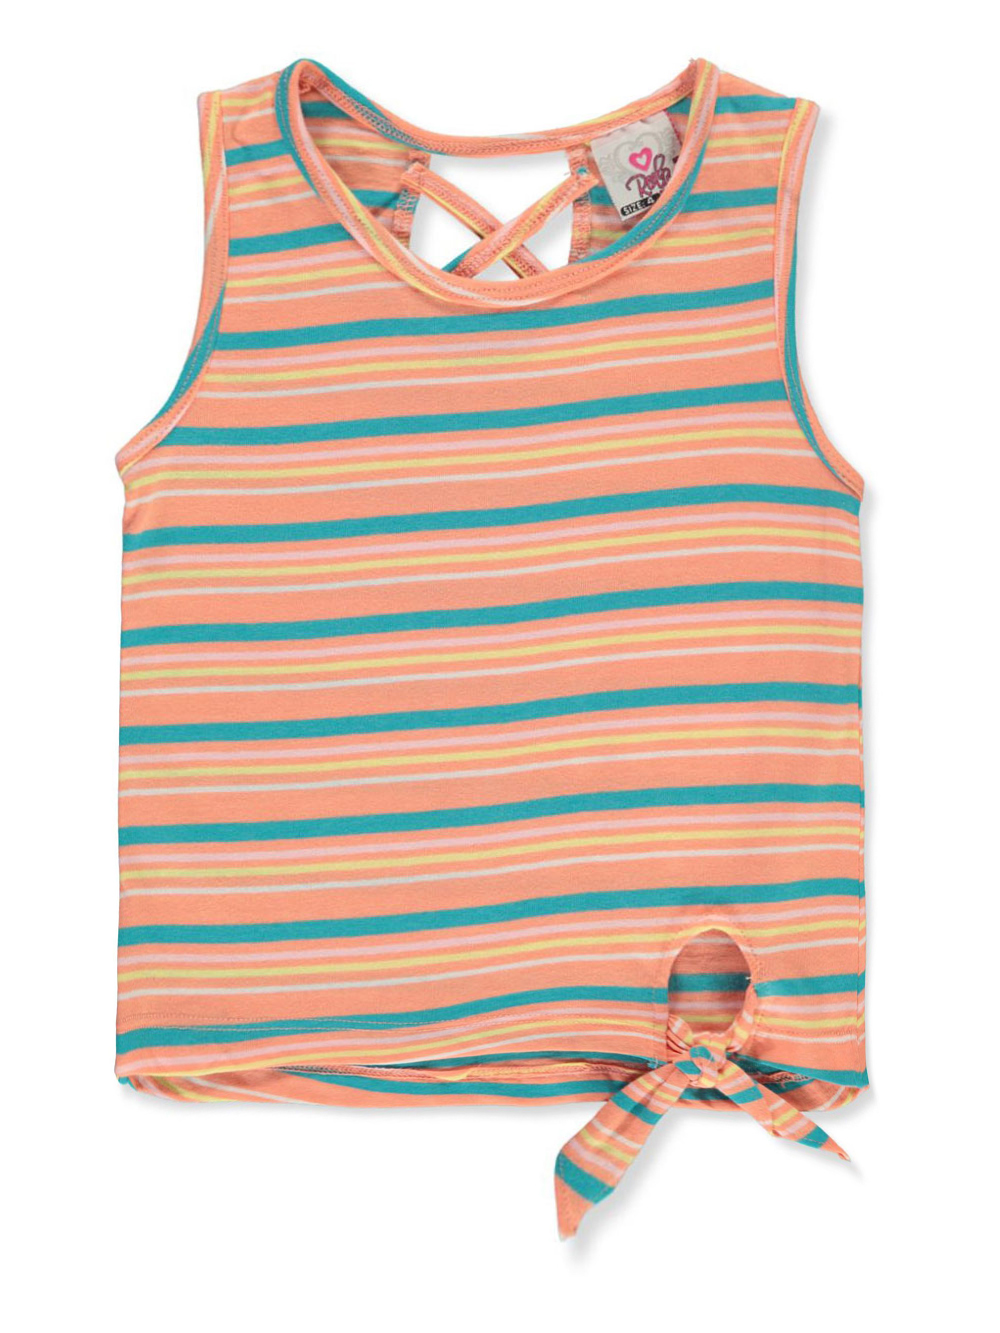 Girls Turquoise and Multicolor Tank Tops